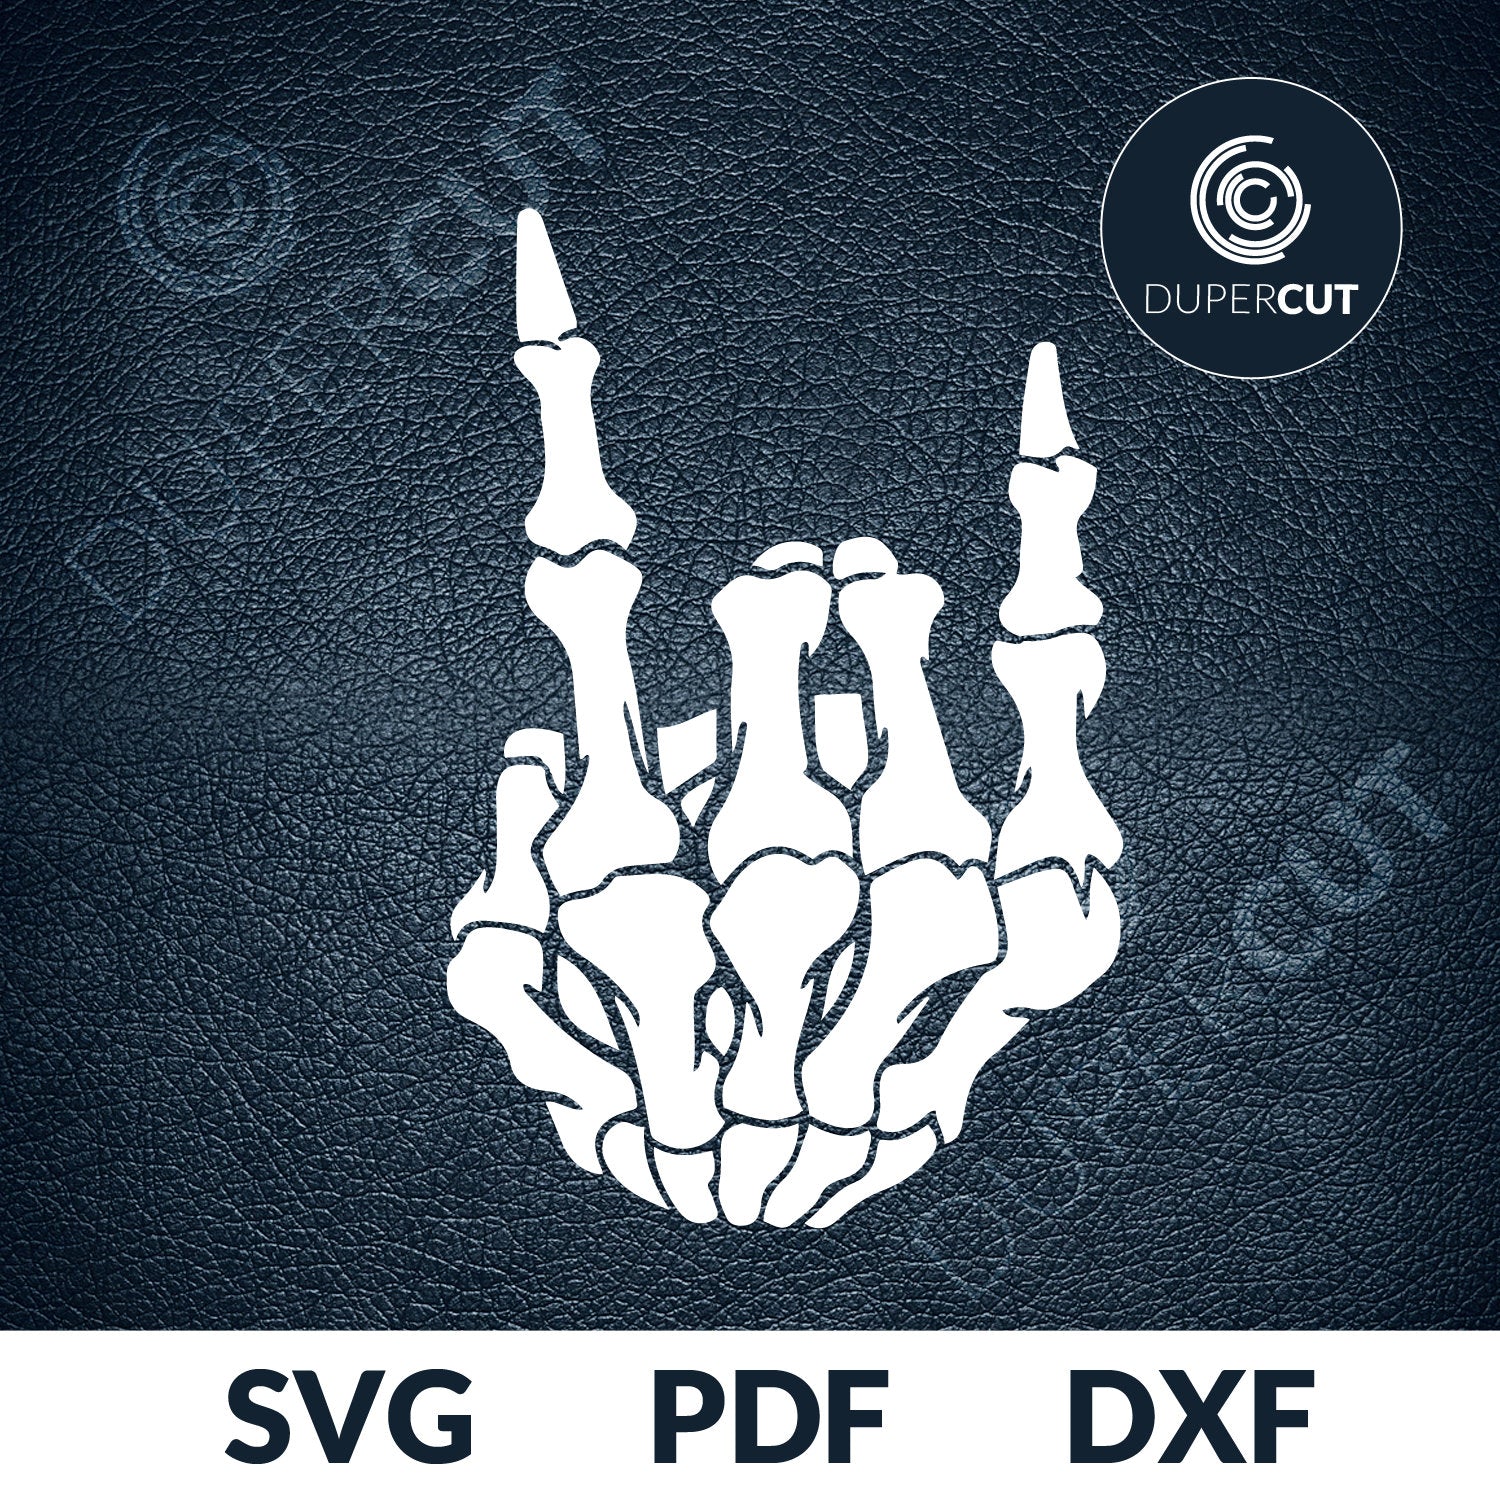 Skeleton skull rock n roll sign. SVG PNG DXF cutting files for Cricut, Silhouette, Glowforge, print on demand, sublimation templates